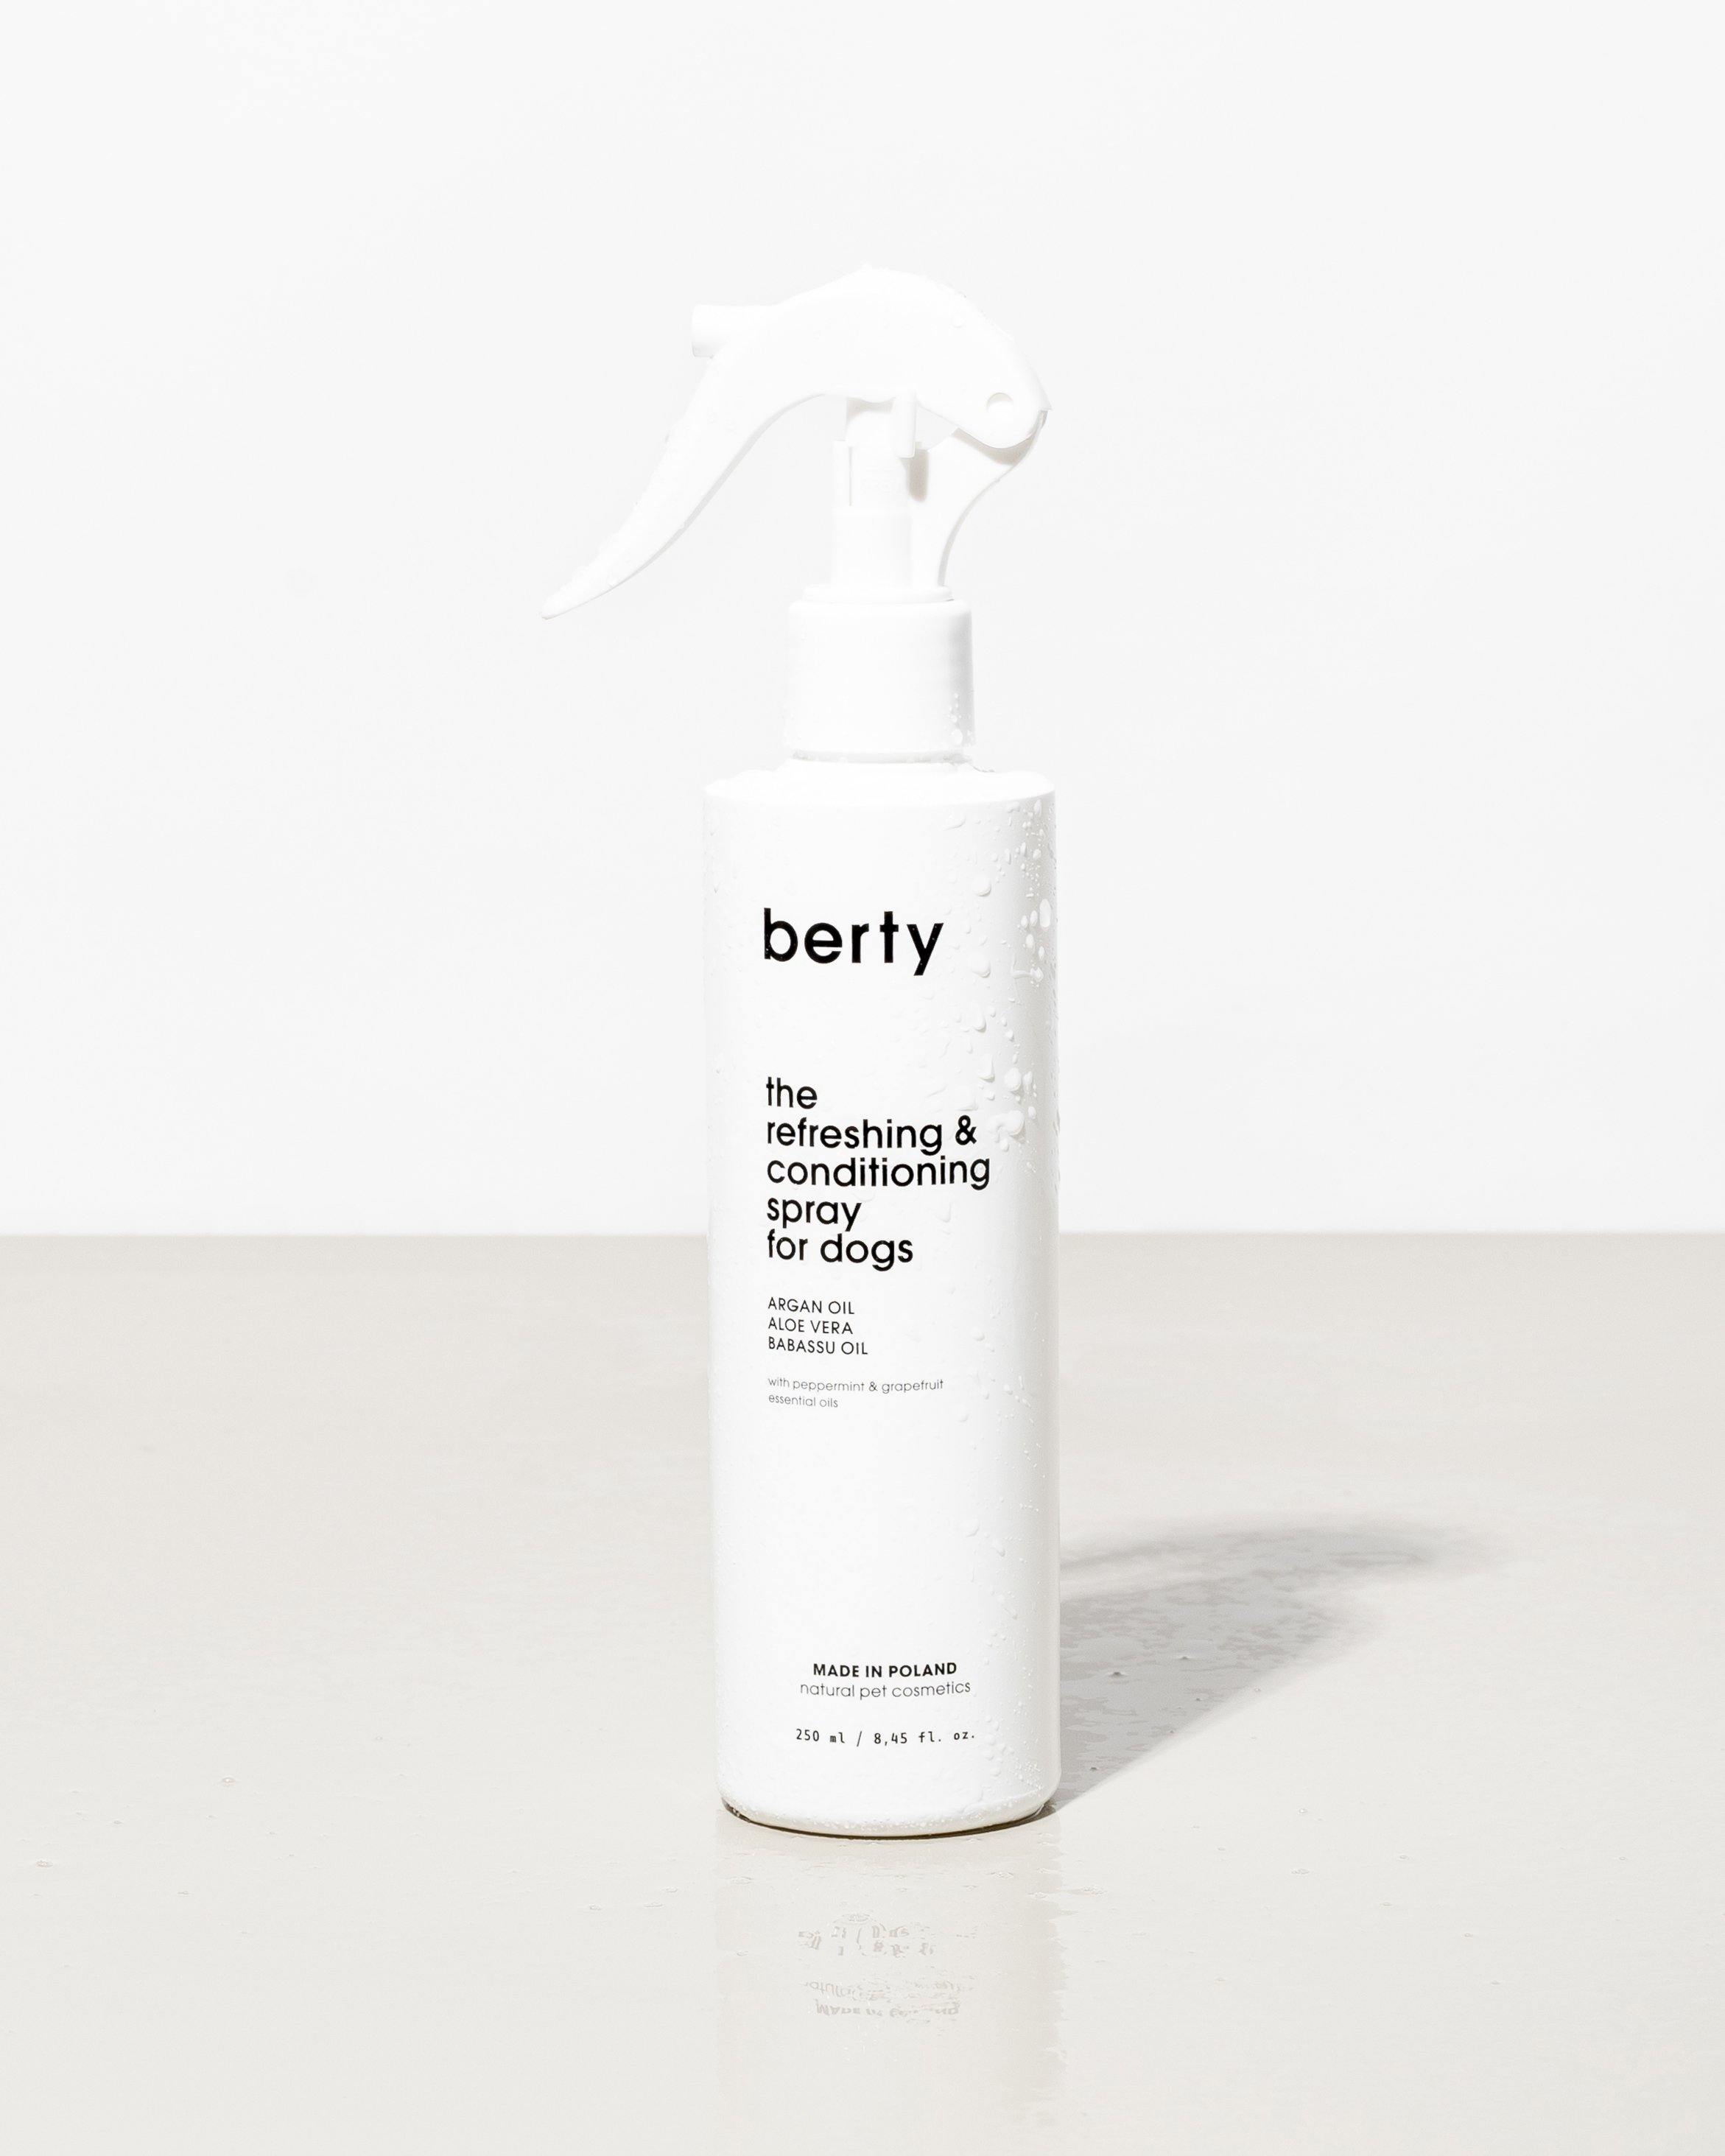 the refreshing & conditioning spray for dogs - berty